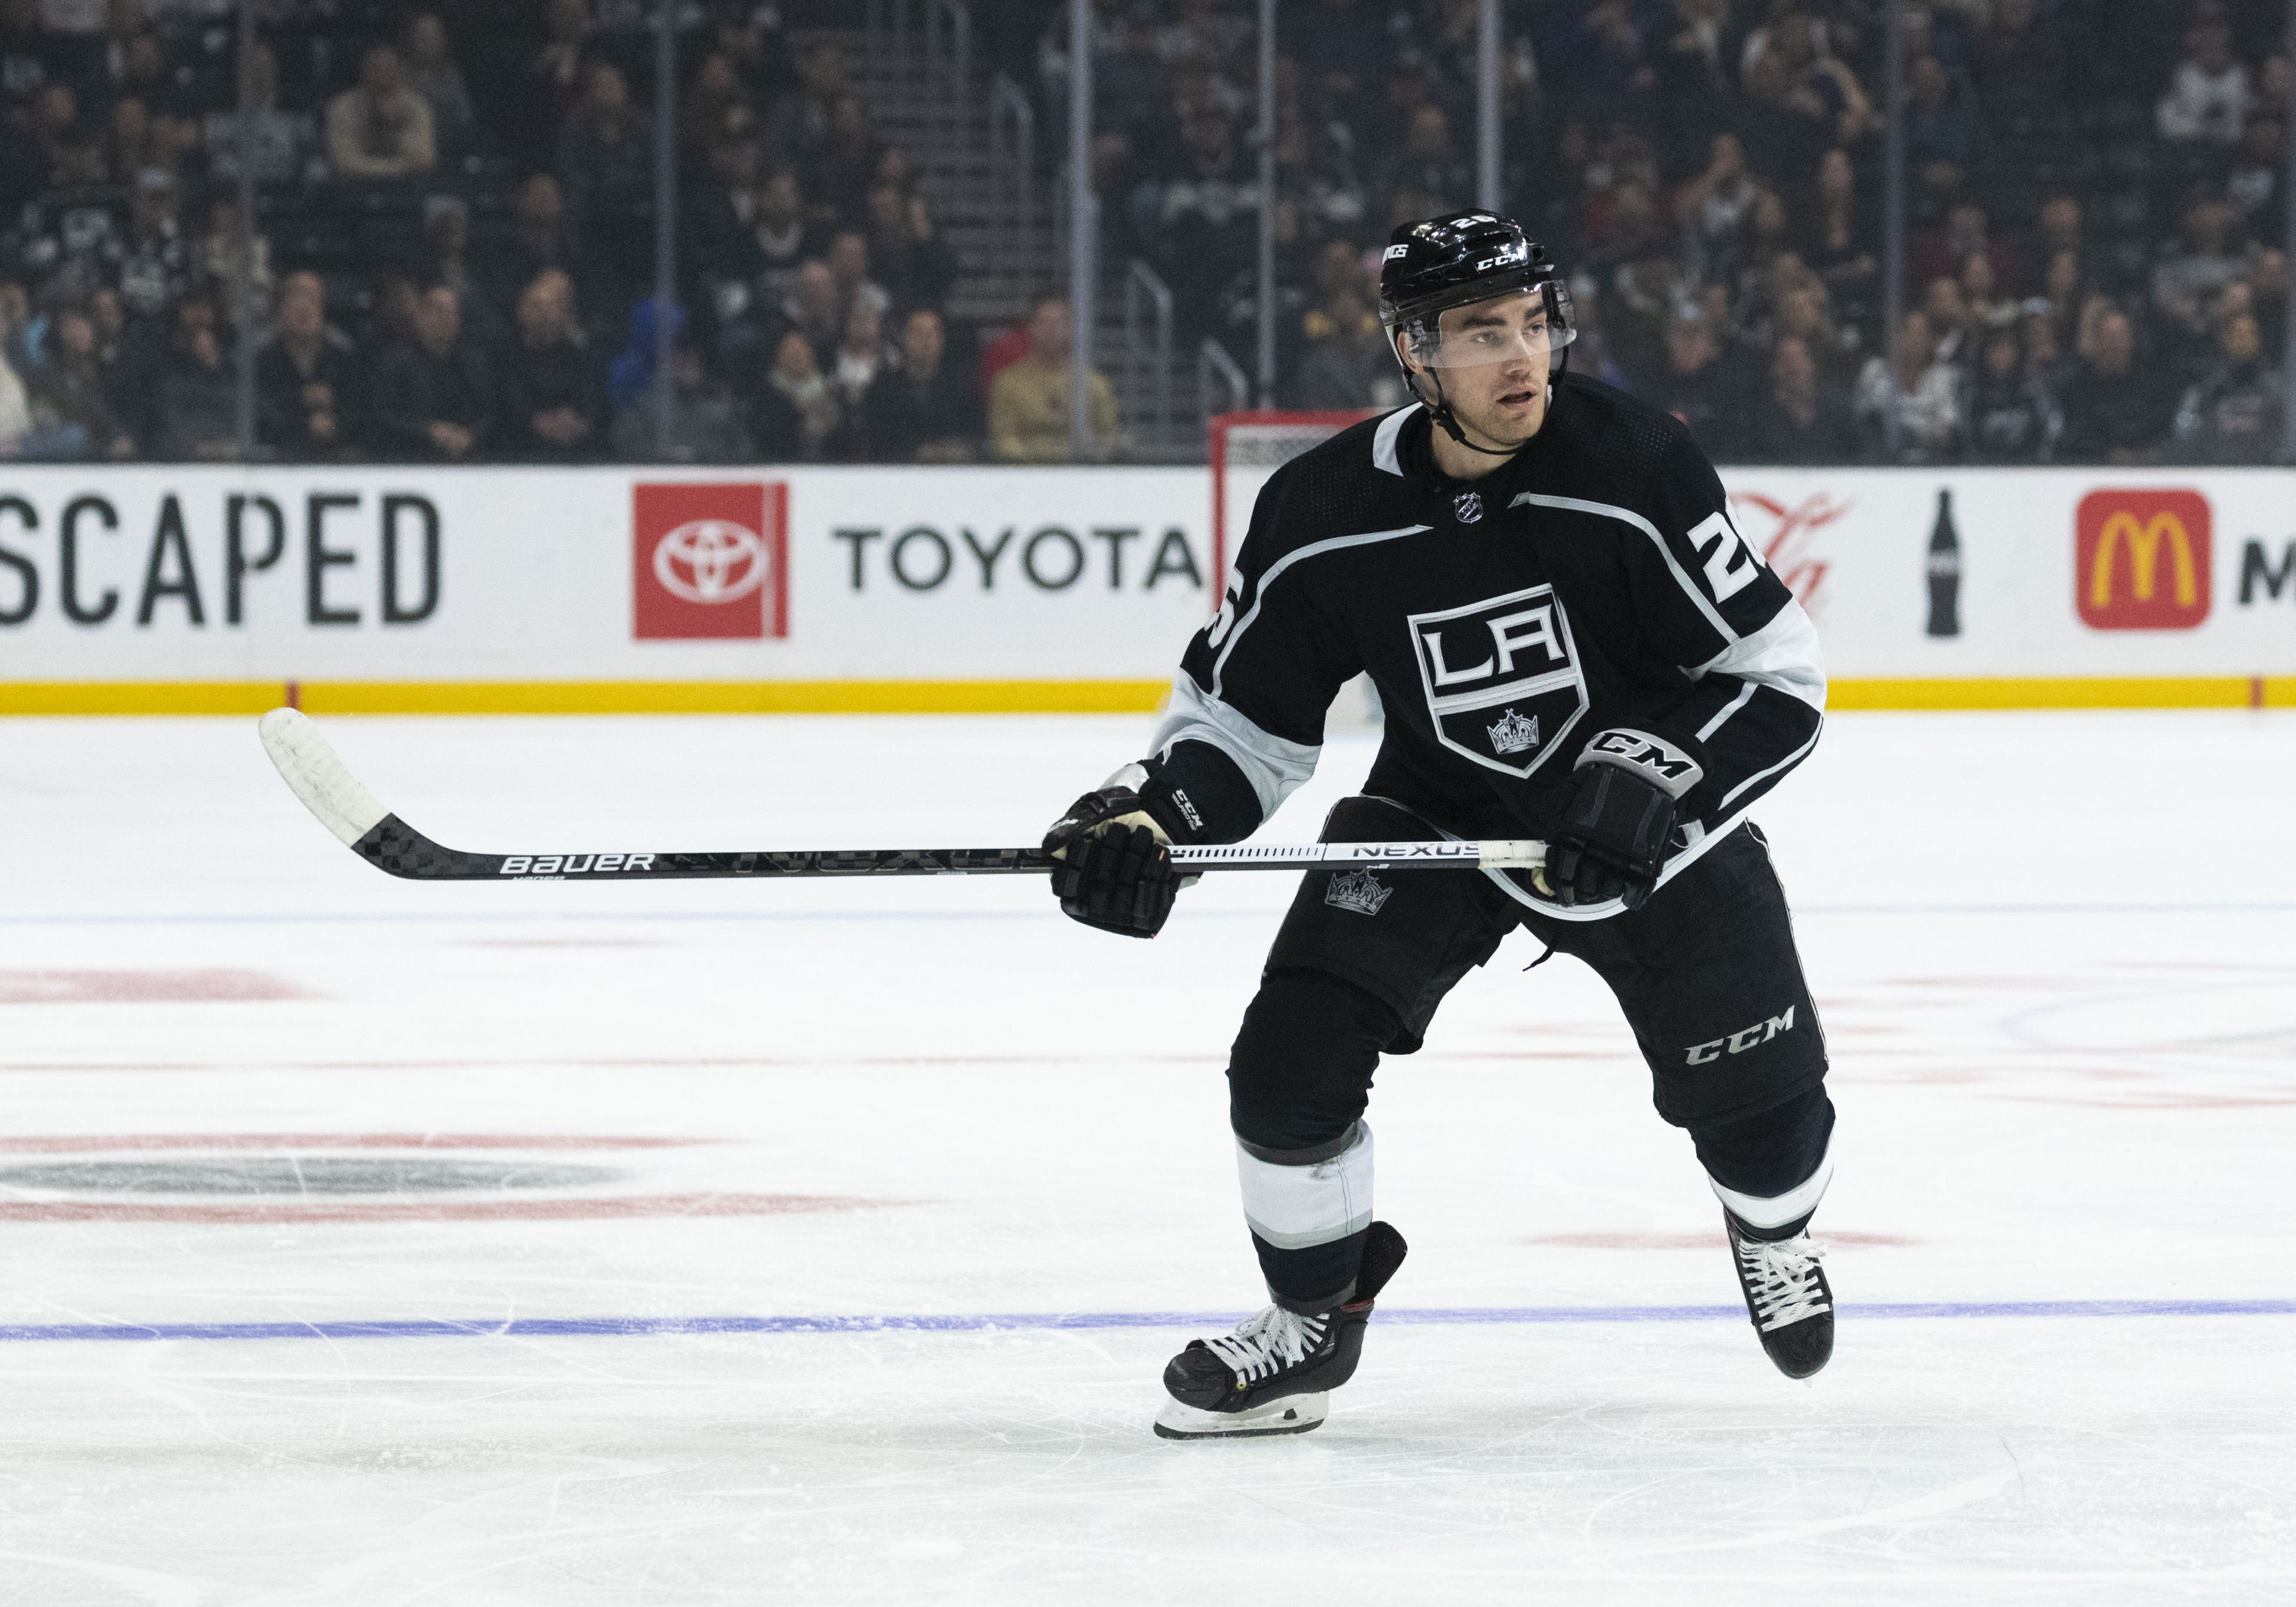 Los Angeles Kings defenseman Sean Walker (26) skates during the NHL regular season hockey game against the Colorado Avalanche on Monday, March 9, 2020 at Staples Center in Los Angeles, Calif.